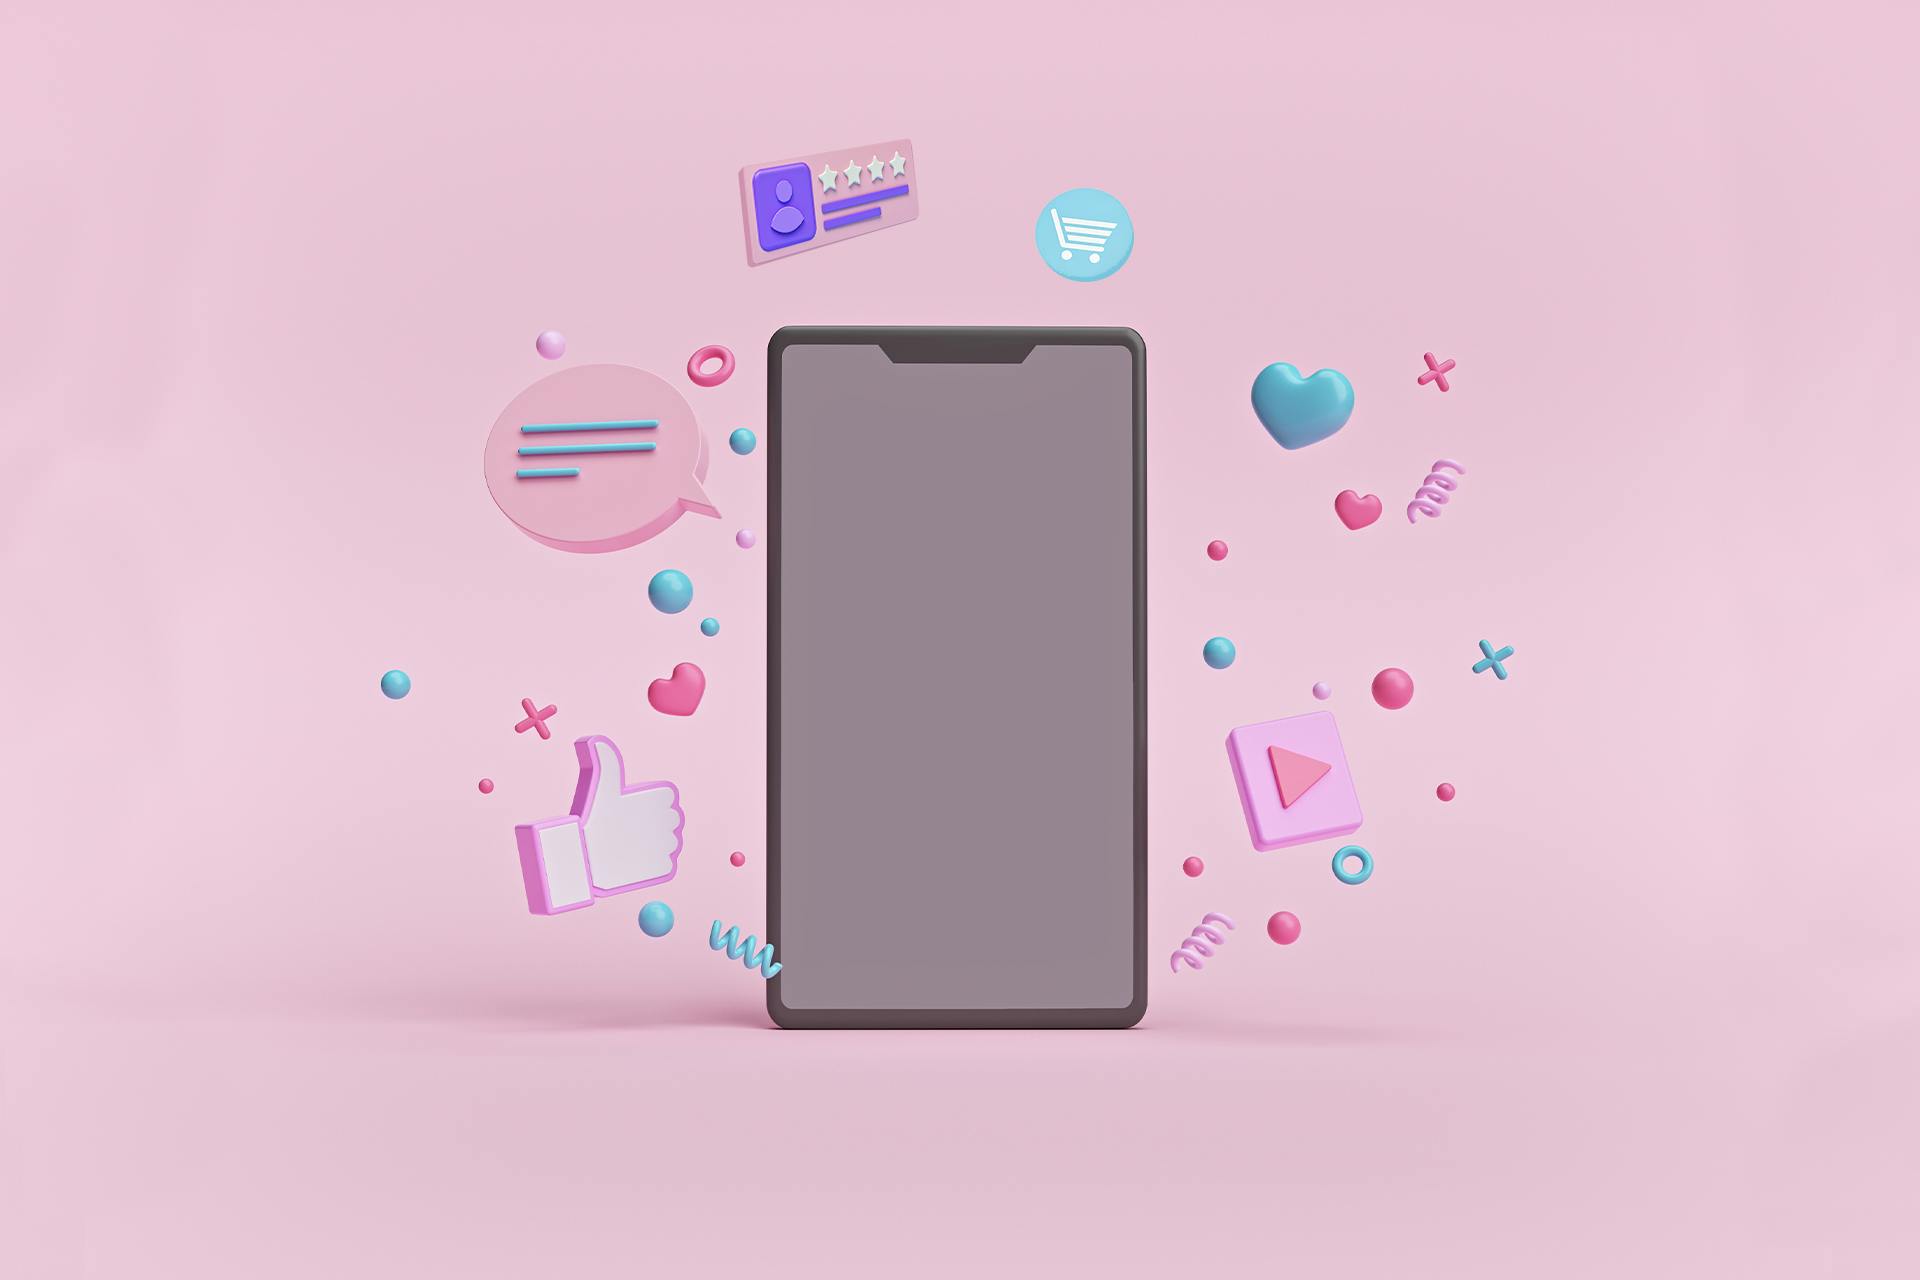 An illustrated version of a smartphone with confetti and social media iconography, like a heart and a Facebook like button, floating around the phone. These celebratory symbols and icons represent the engagement notifications a community manager would hope to see after implementing a new social media marketing strategy. 